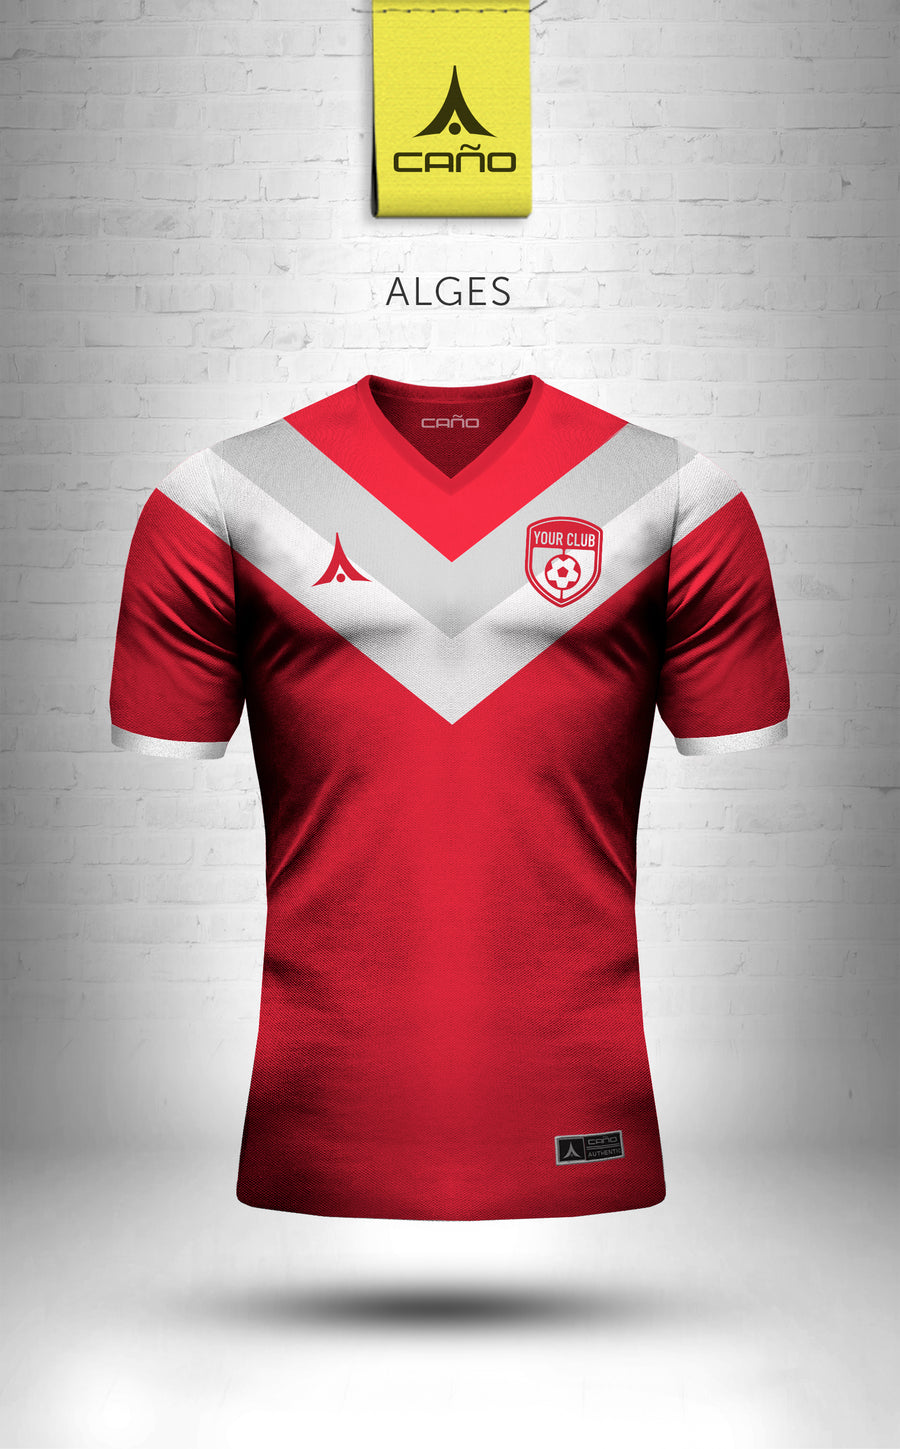 Alges in red/white